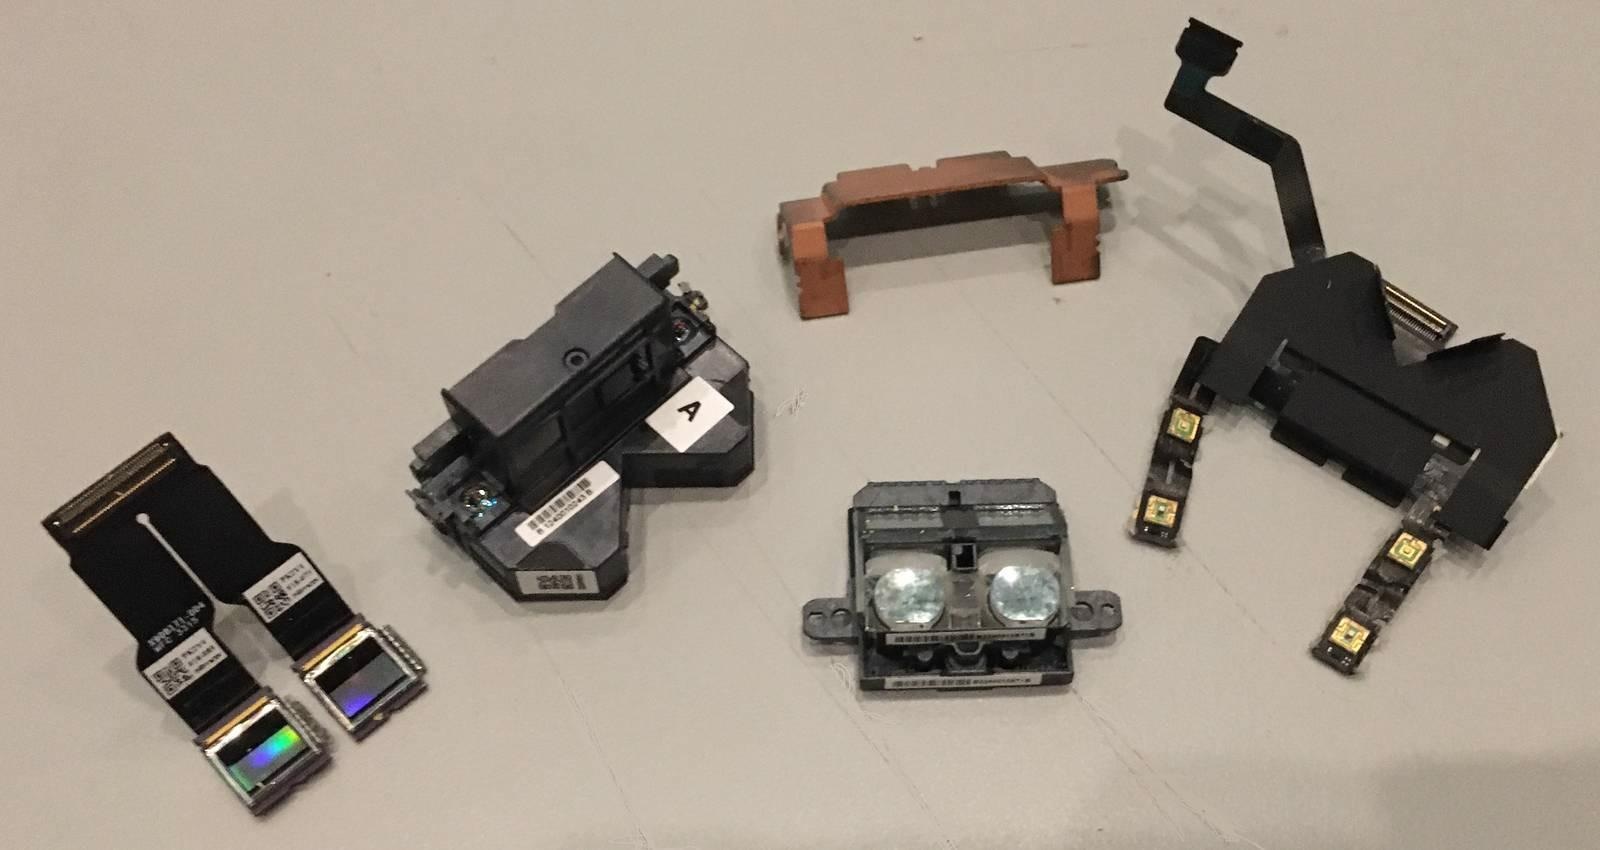 Another look at HoloLens 2 components, partially disassembled.